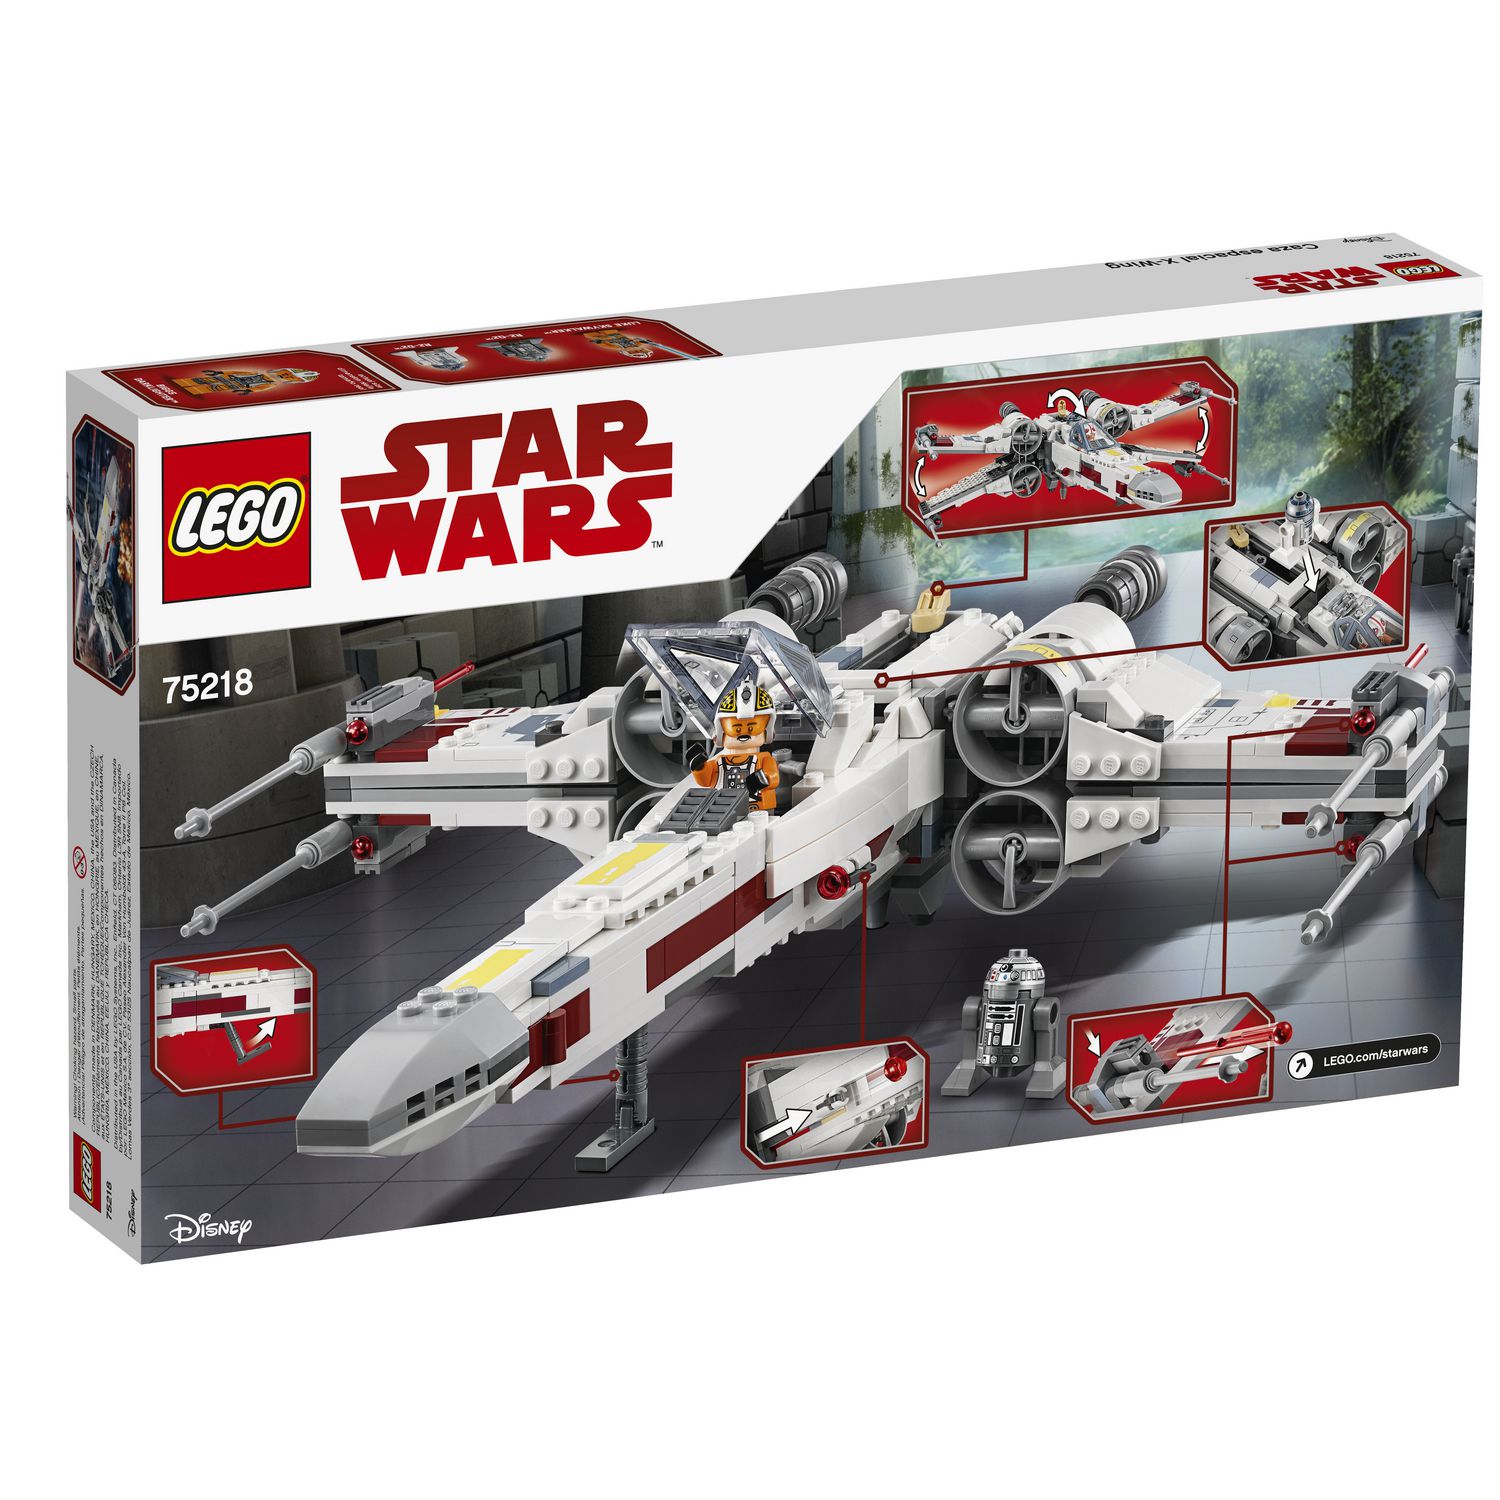 LEGO Star Wars X-Wing Starfighter 75218 Toy Building Kit (731